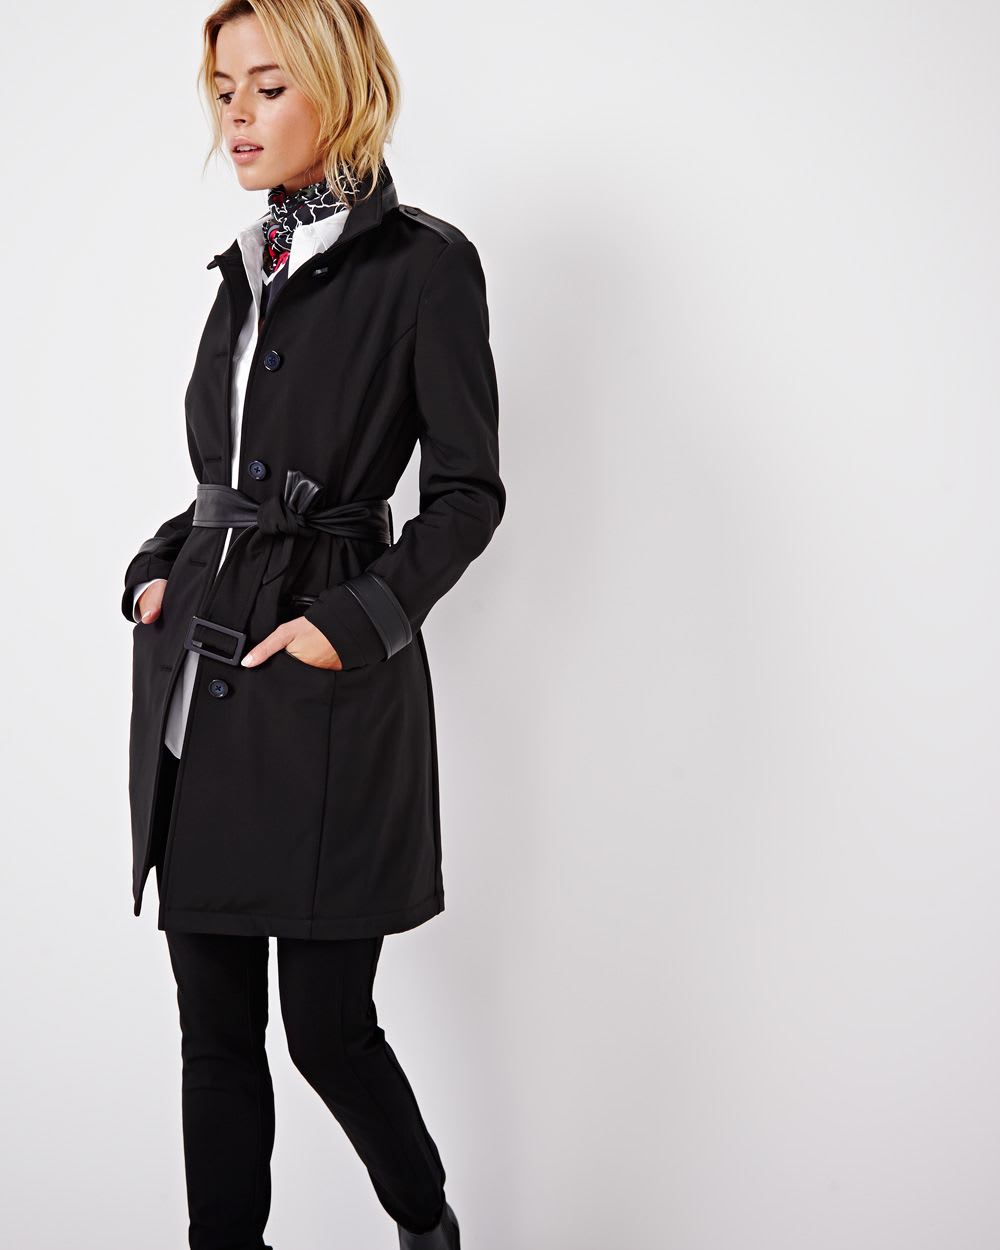 Modern raincoat with faux leather details | RW&CO.